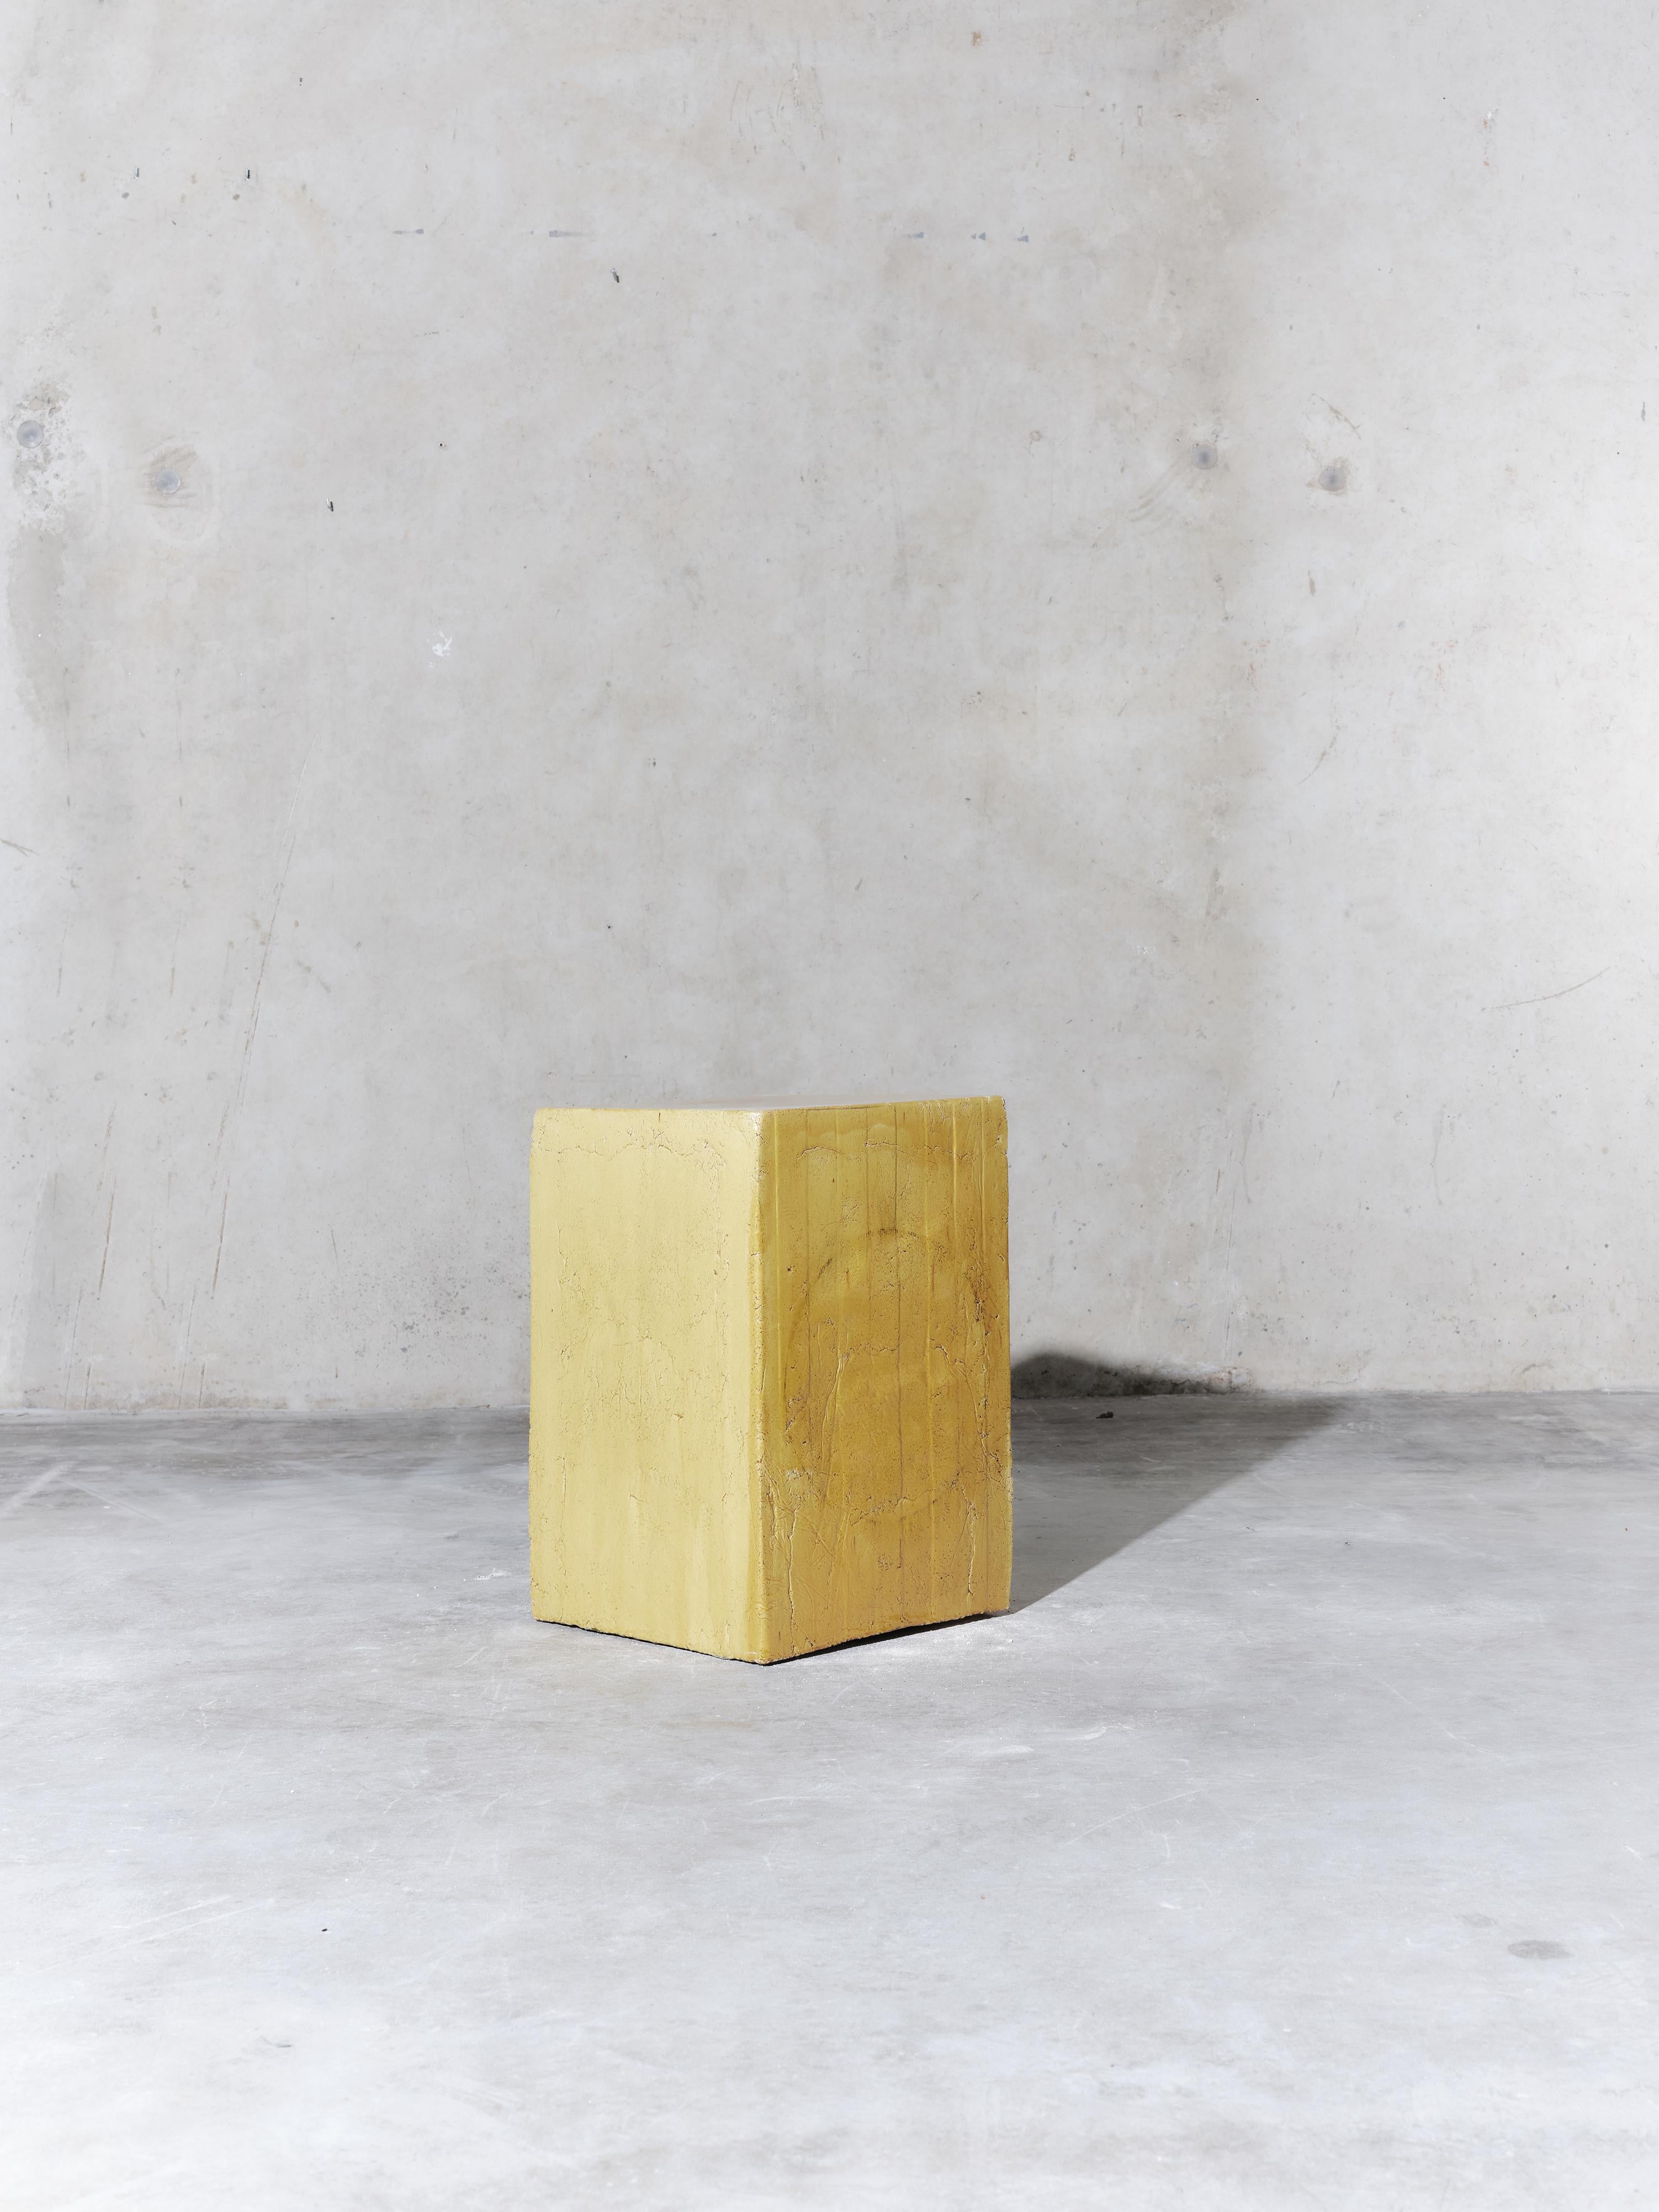 Handmade earthenware side table / column / stool manufactured at the workshop of Apparatu in Barcelona. Different clay bodys are mixed with natural fibers like corn, straw, or heather straw. The pieces are casted by hand, creating a thick and strong